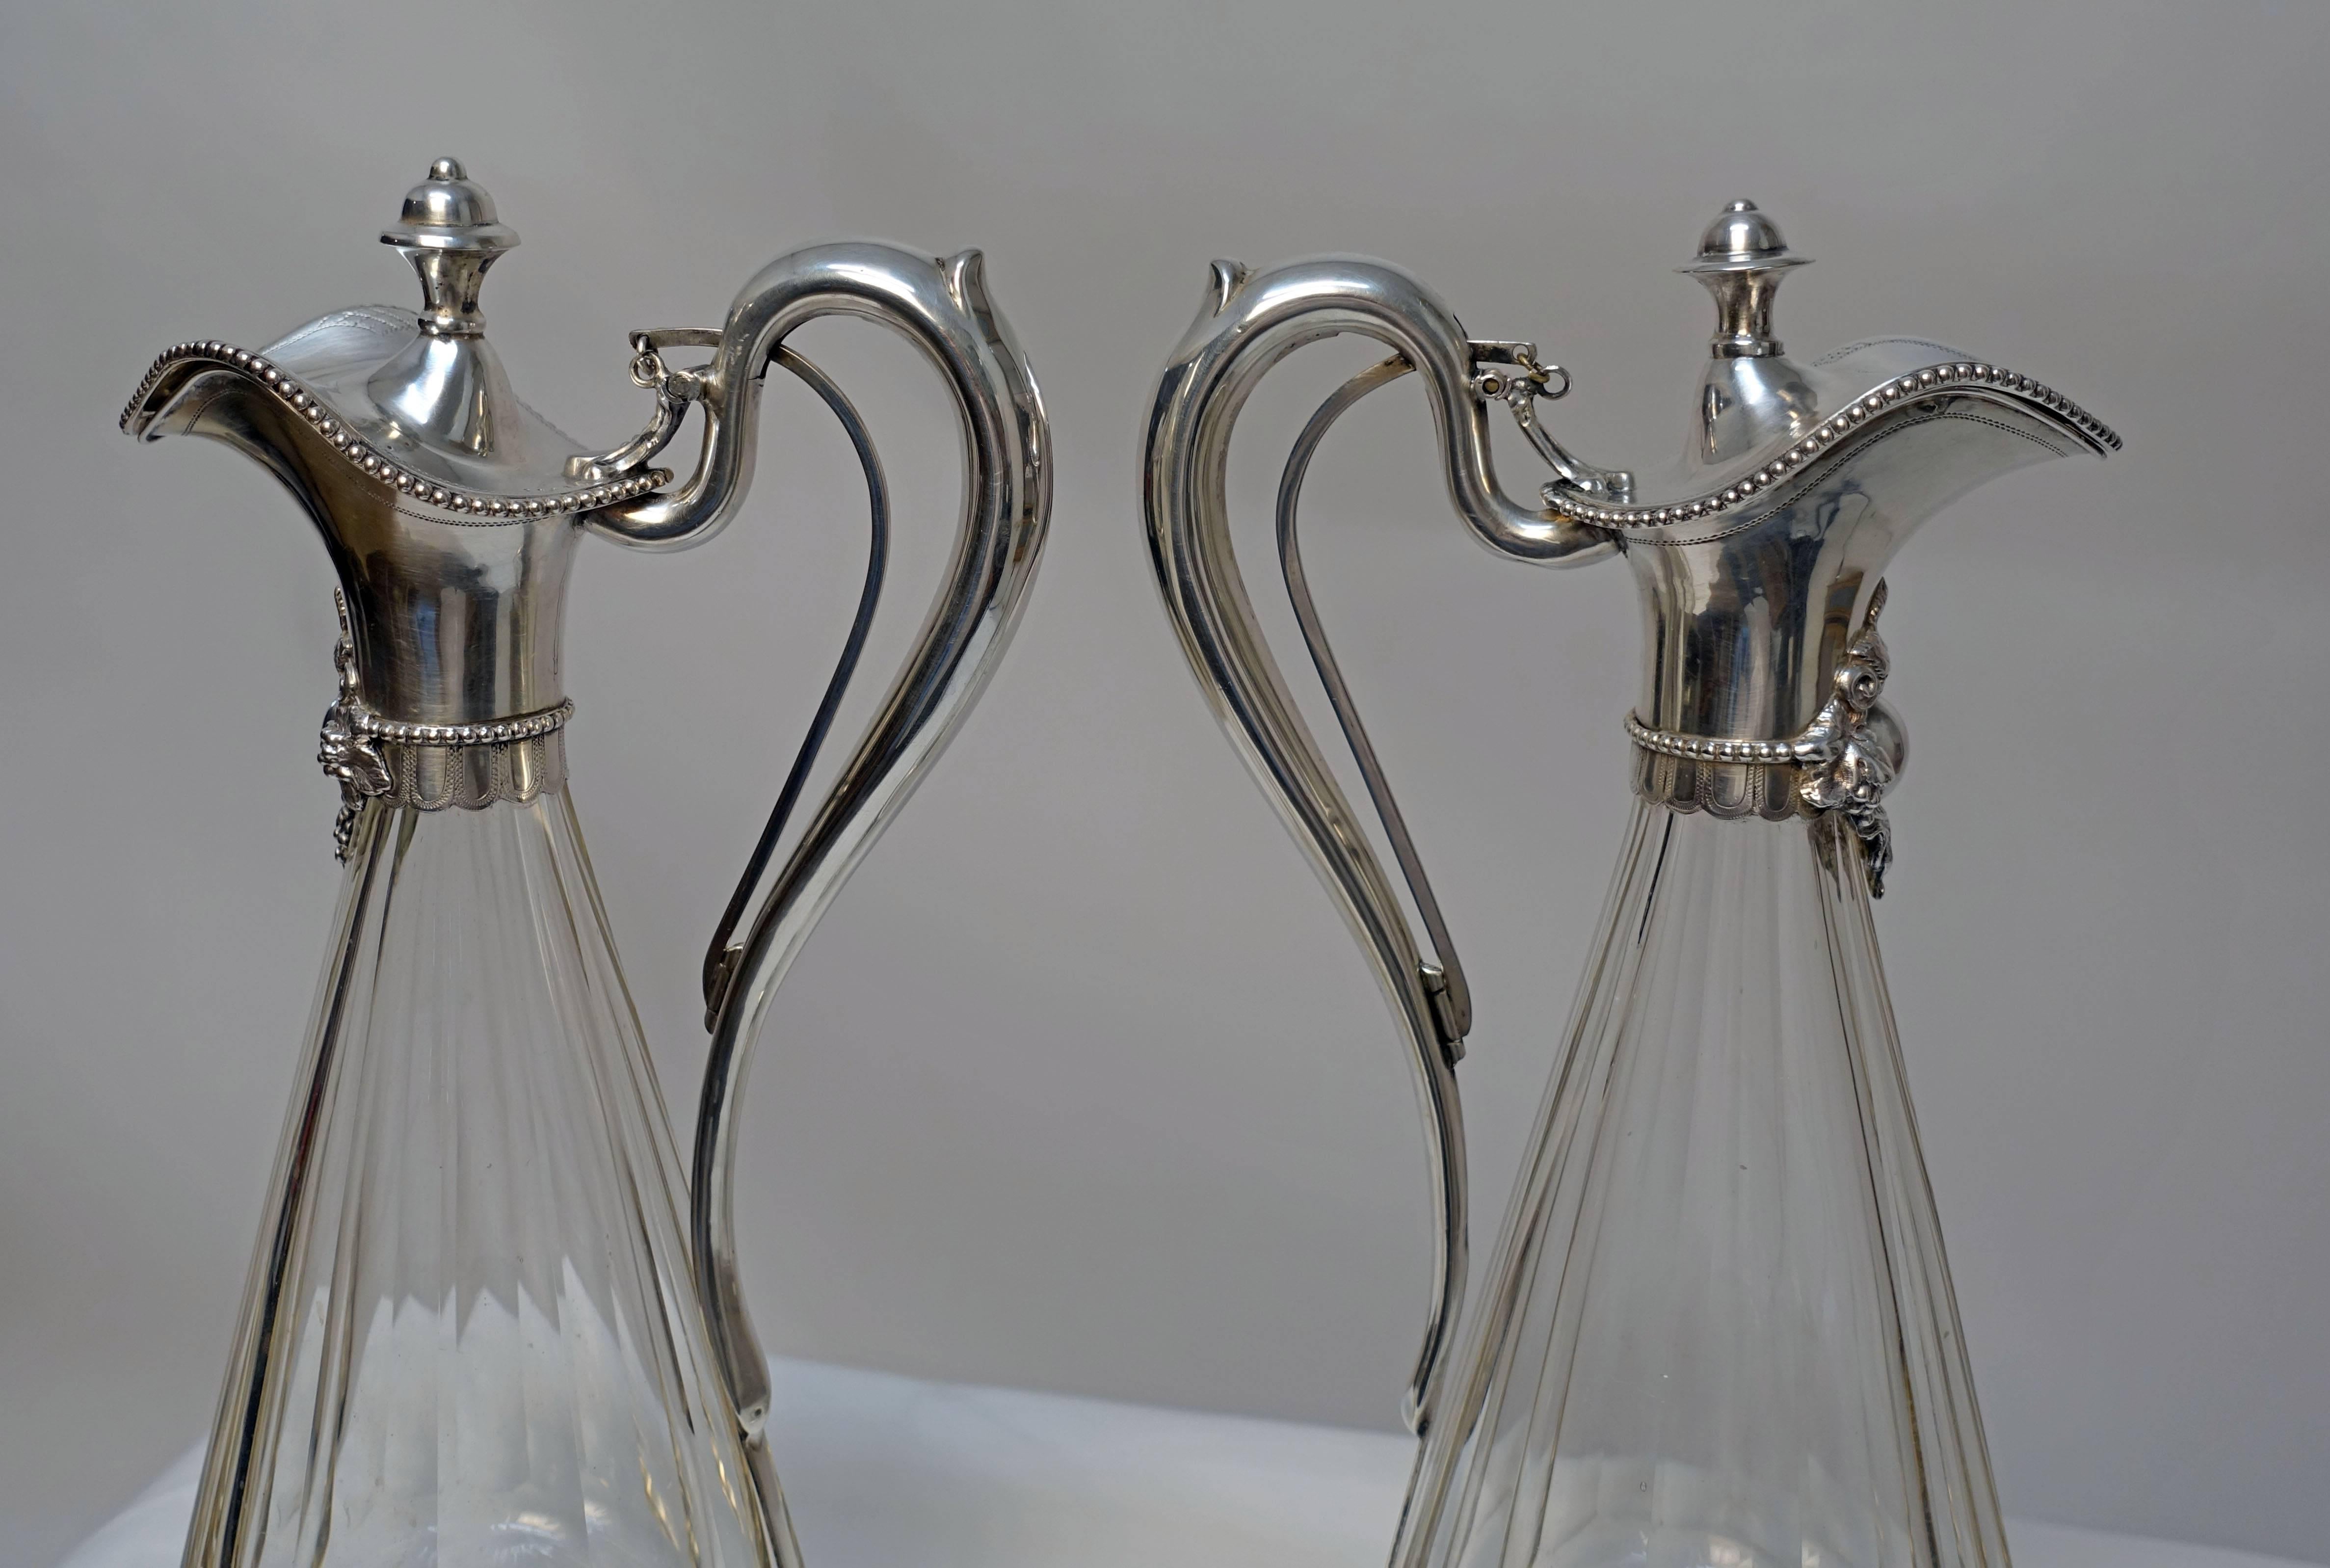 French 19th Century Silver and Cut-Glass Wine Clarets Decanters